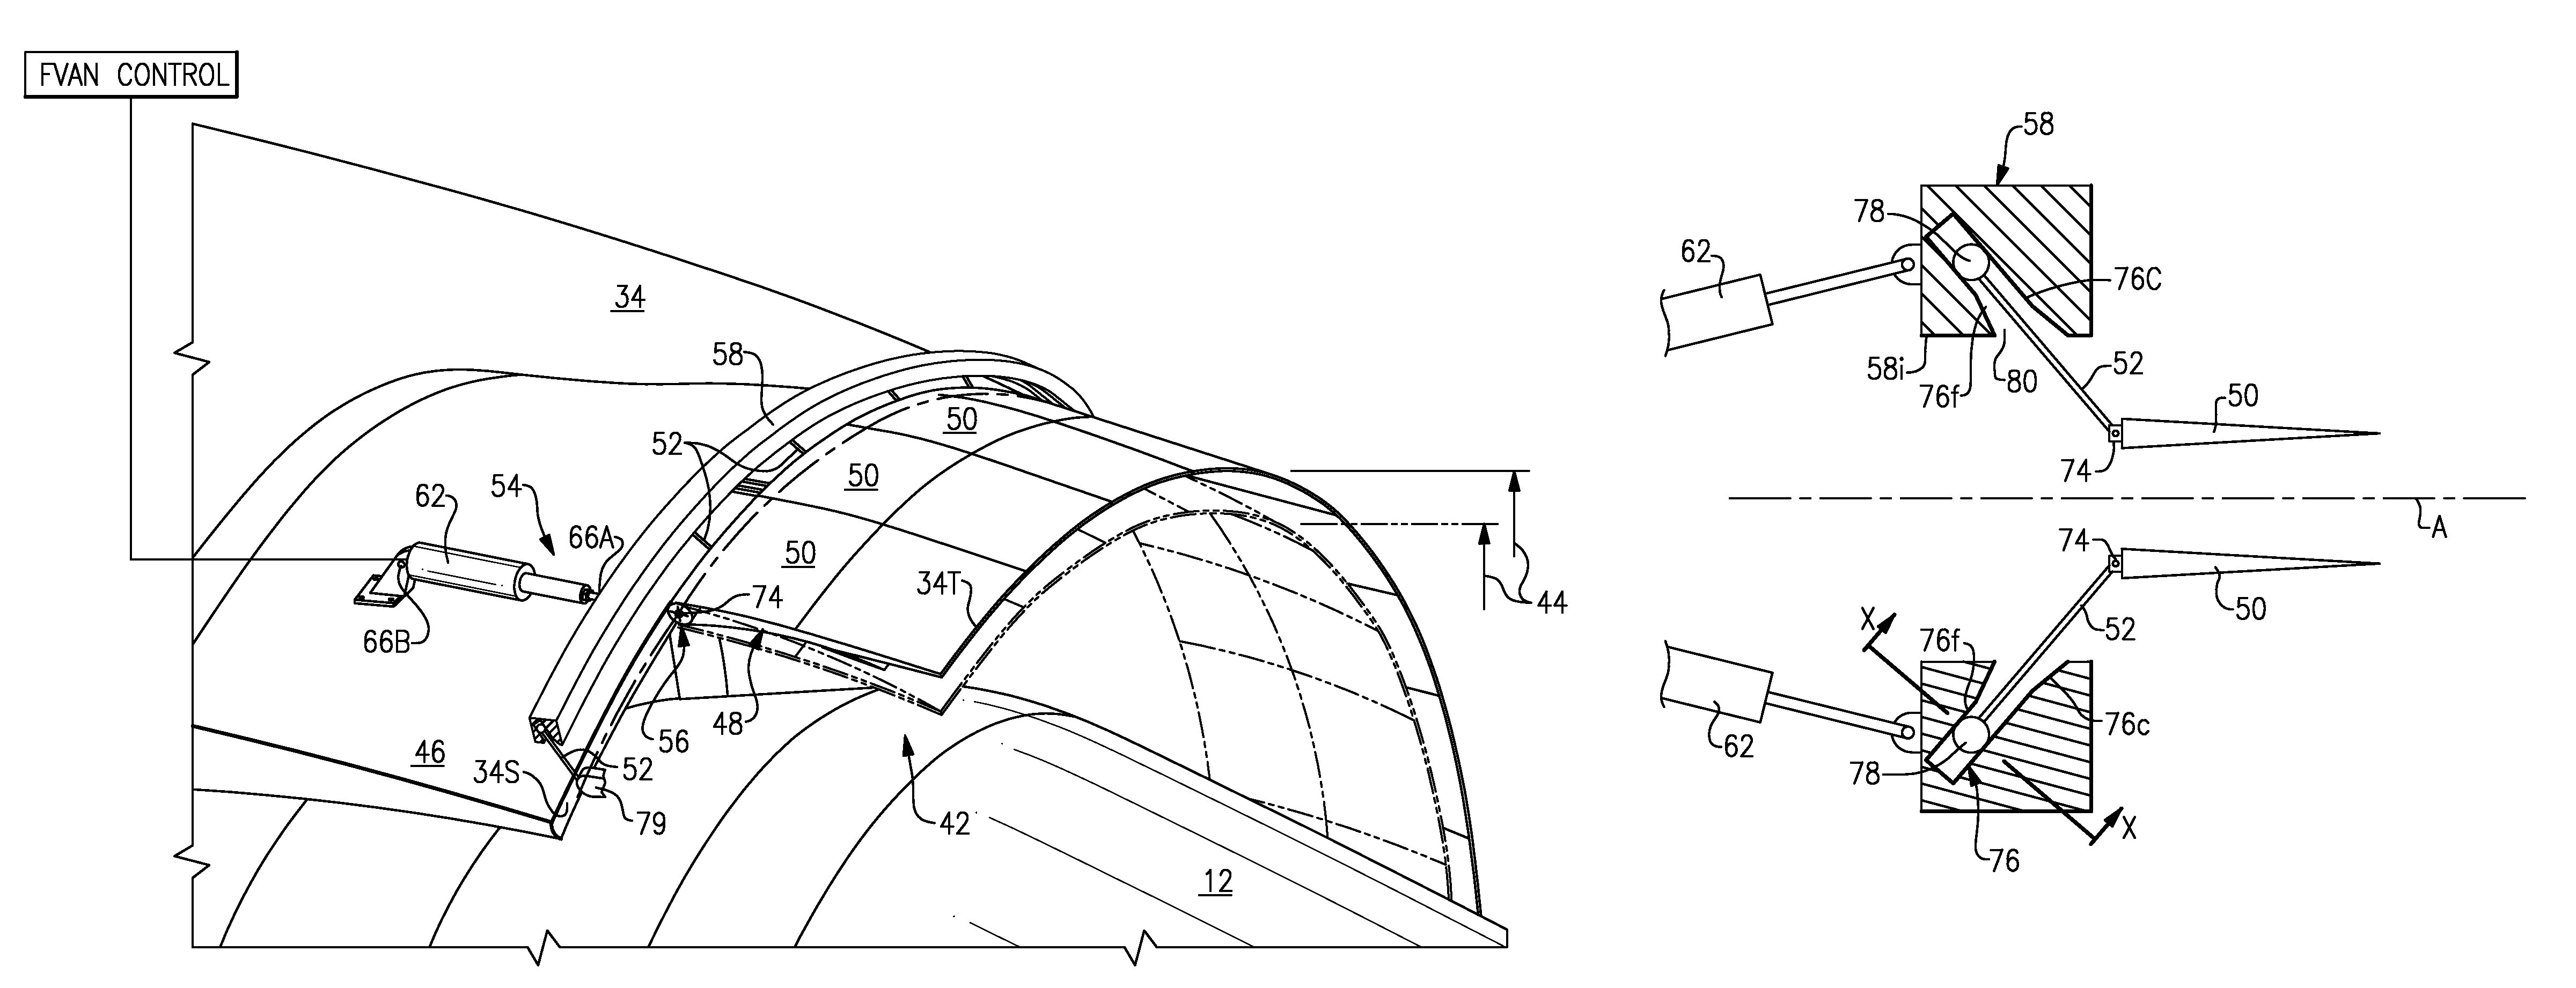 Fan variable area nozzle for a gas turbine engine fan nacelle with drive ring actuation system